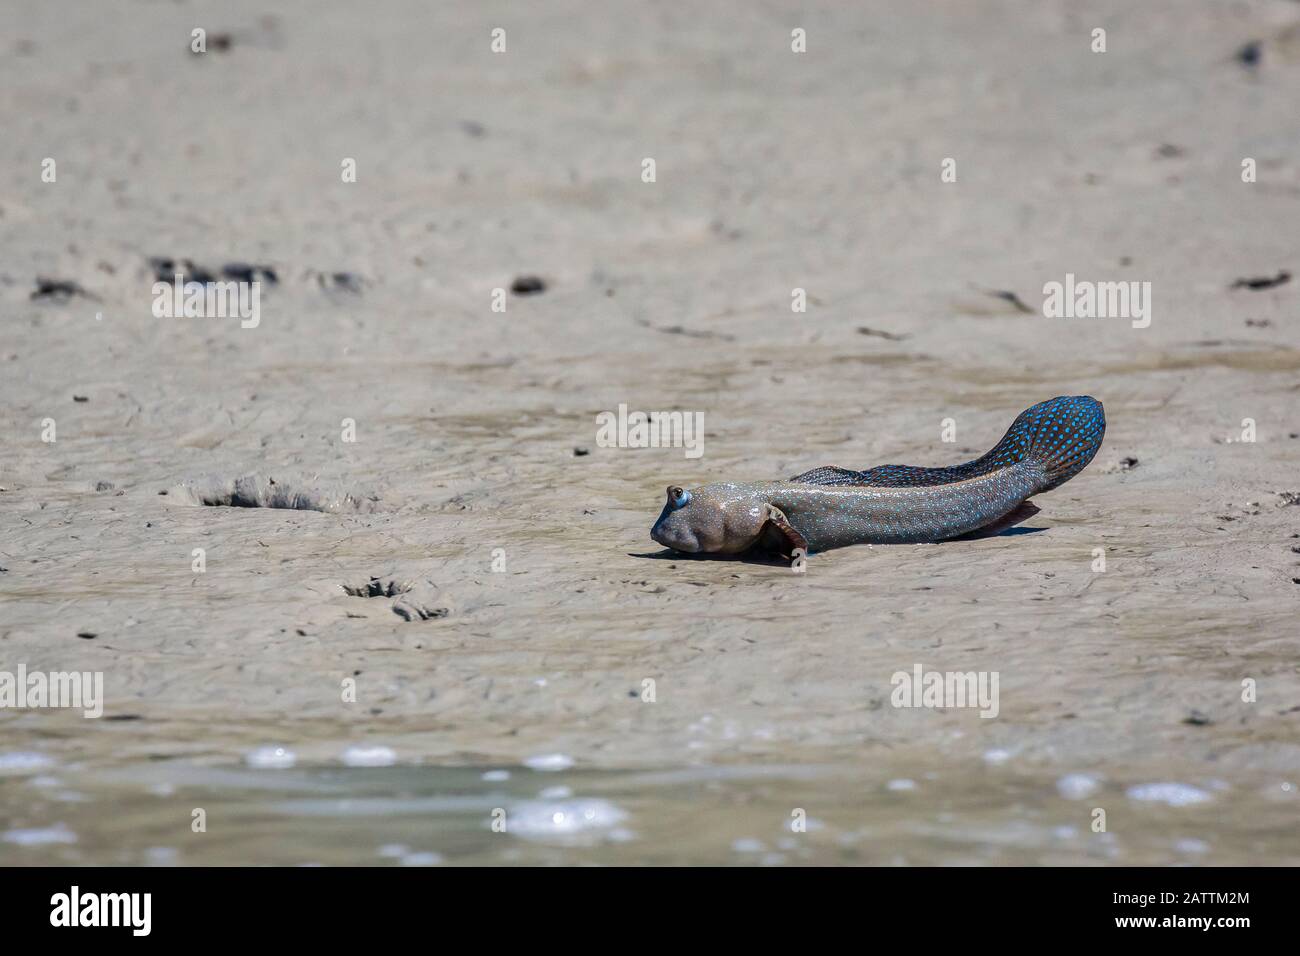 bluespotted mudskipper, Boleophthalmus caeruleomaculatus, adult, male, raising fins to other males, defending its territories and/or courting potentia Stock Photo